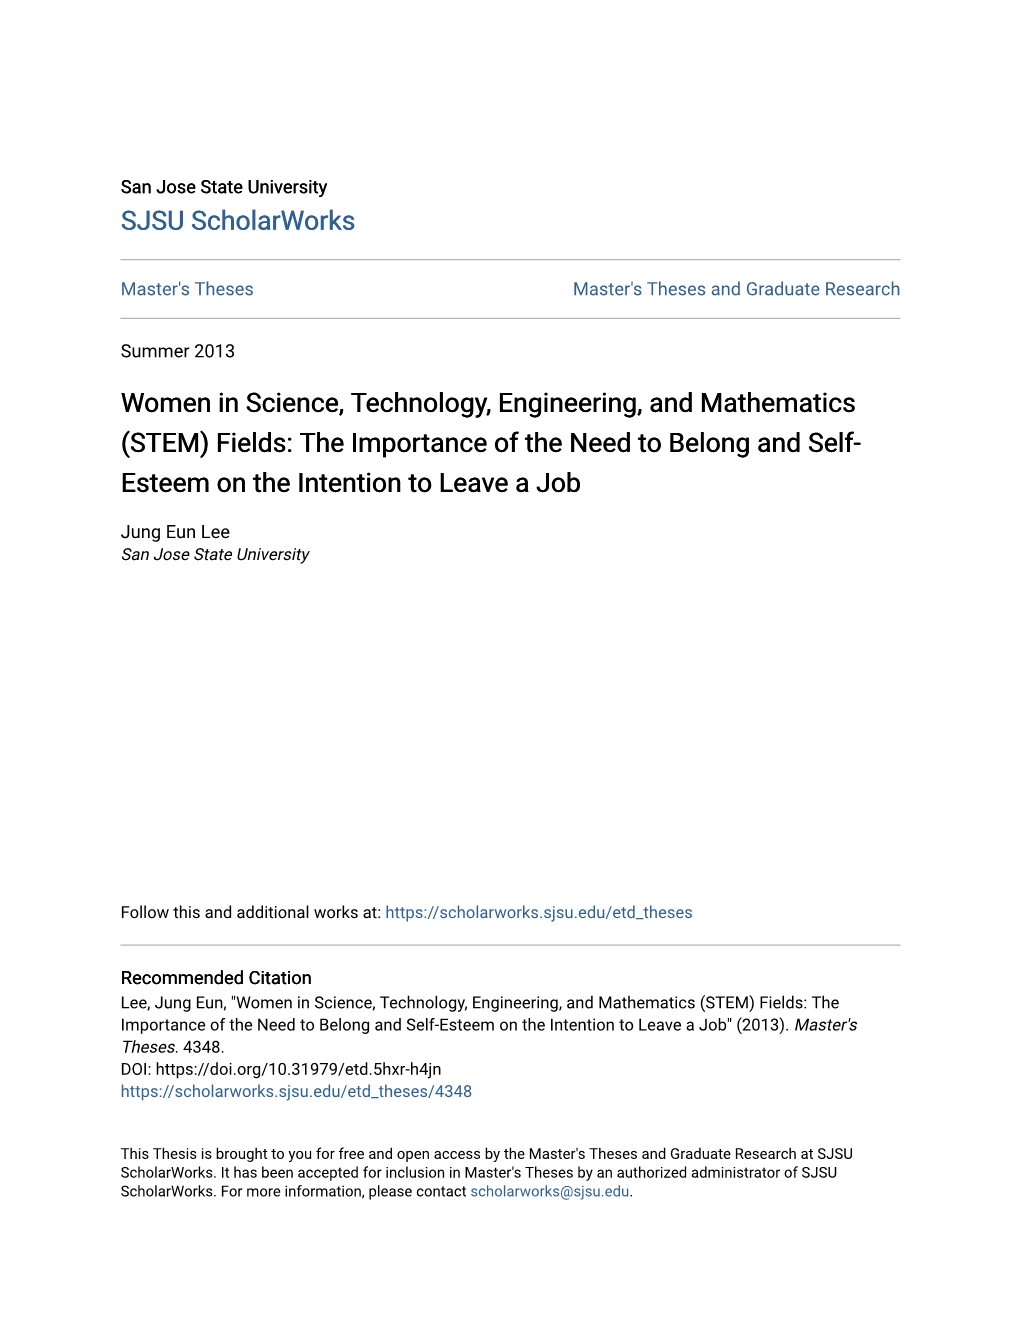 Women in Science, Technology, Engineering, and Mathematics (STEM) Fields: the Importance of the Need to Belong and Self- Esteem on the Intention to Leave a Job